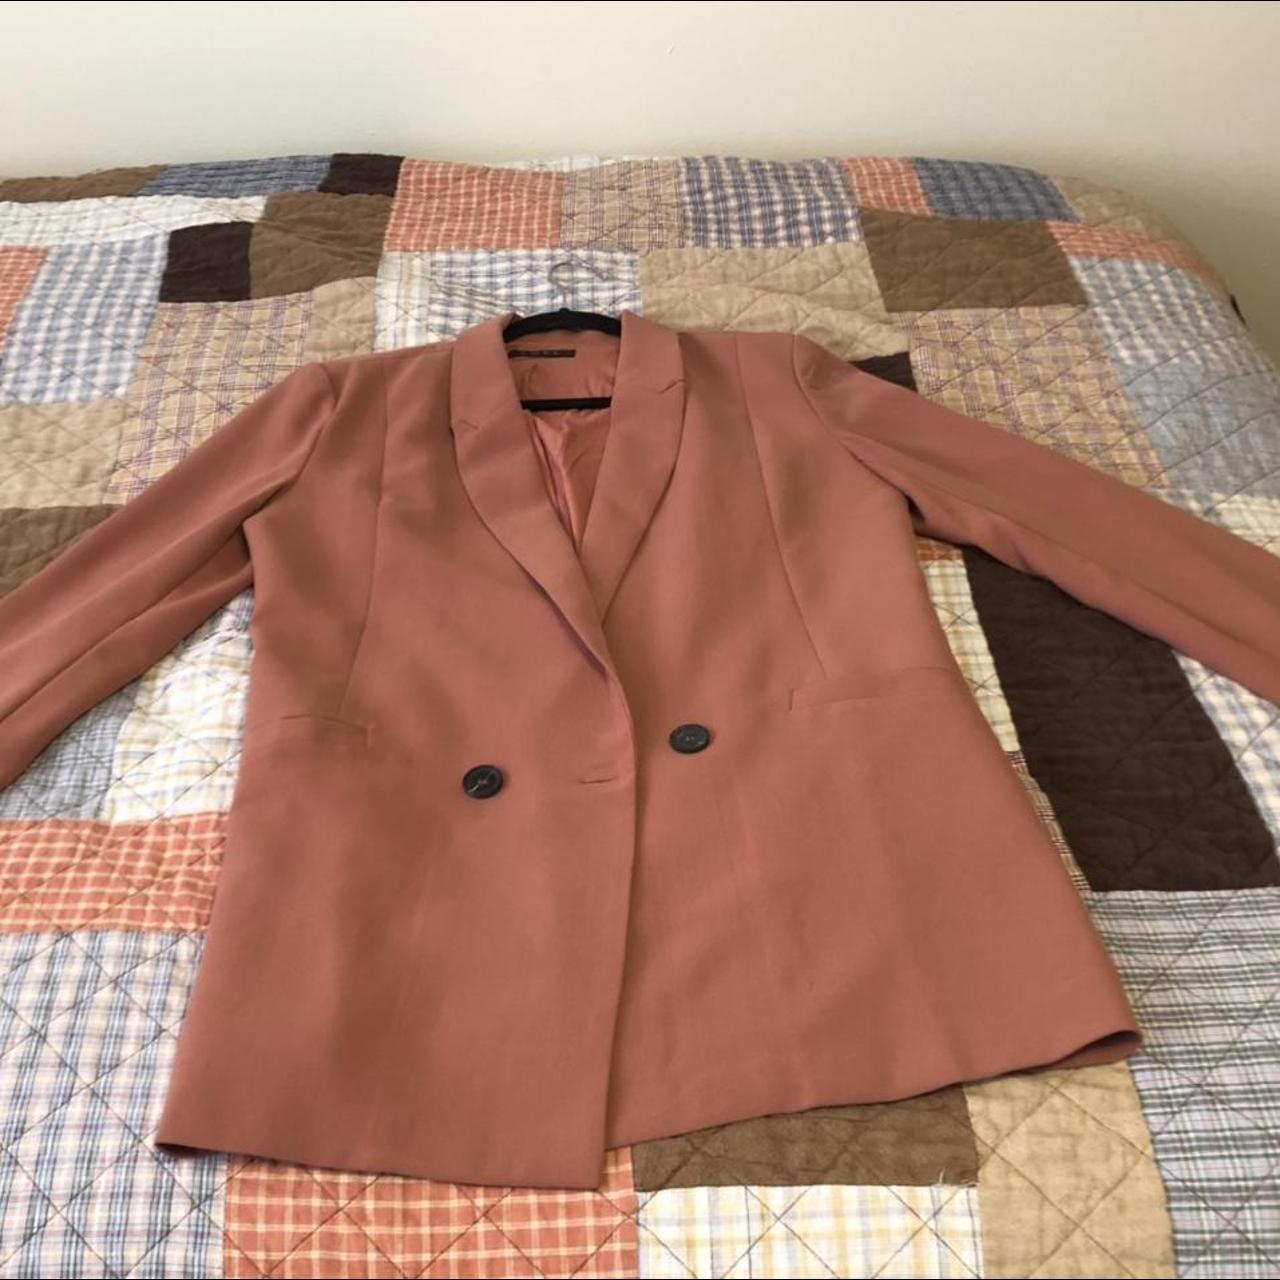 Product Image 1 - Pink women’s Blazer barely used